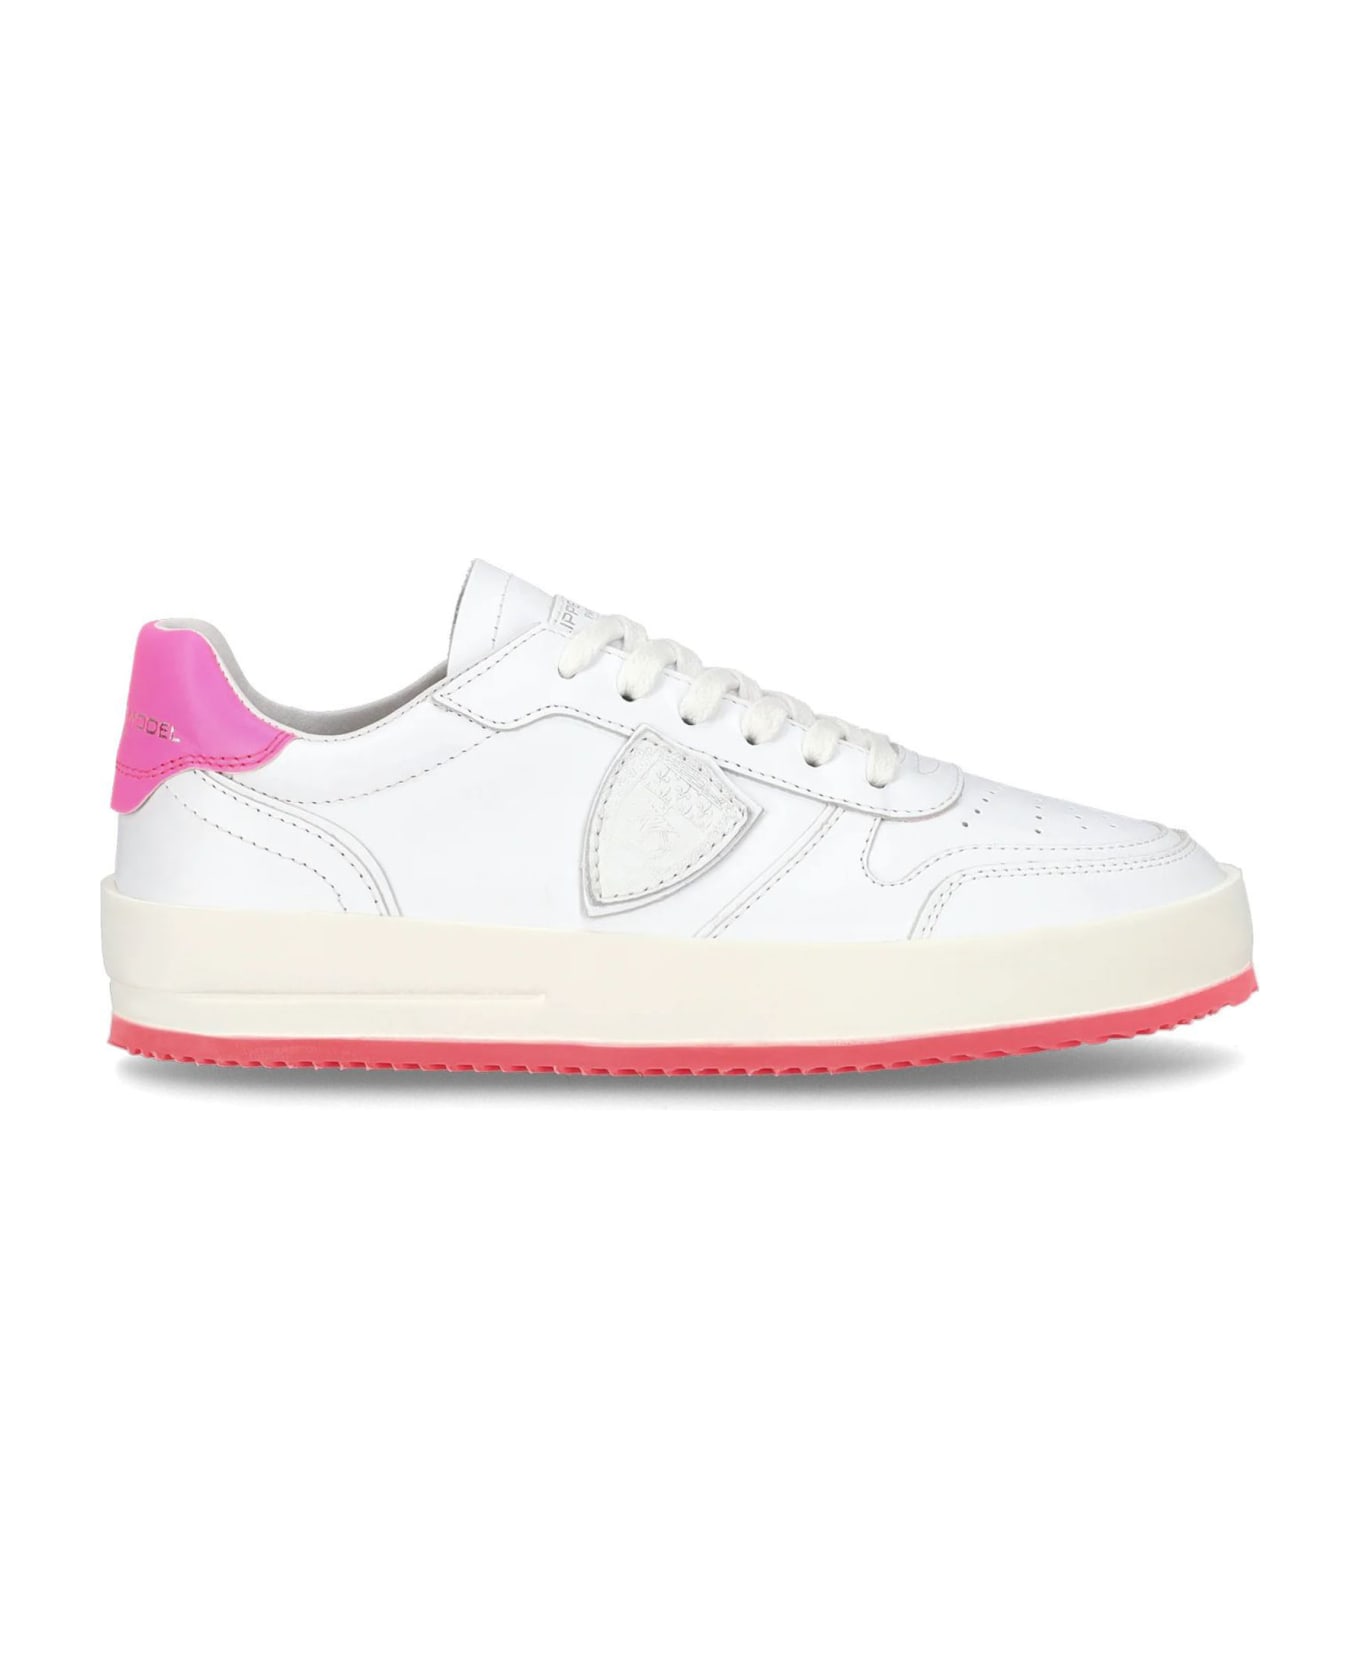 Philippe Model White And Pink Calfskin Sneakers - Bianco+fuxia スニーカー